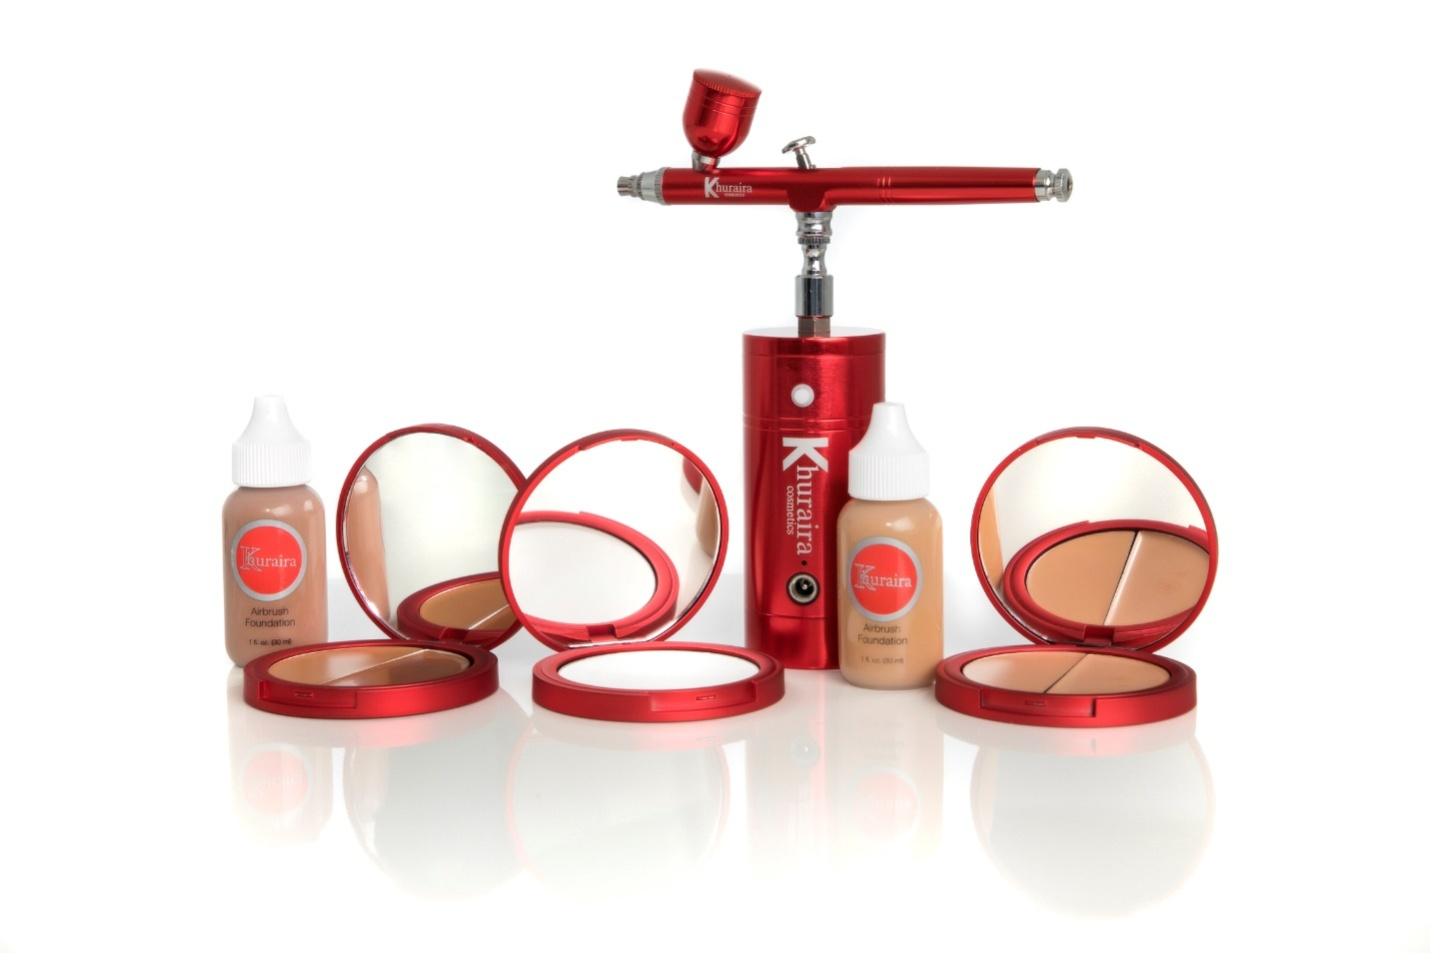 Khuraira Airbrush Kit is a professional yet portable tool that gives 12 hours long application of the HD Airbrush Foundation